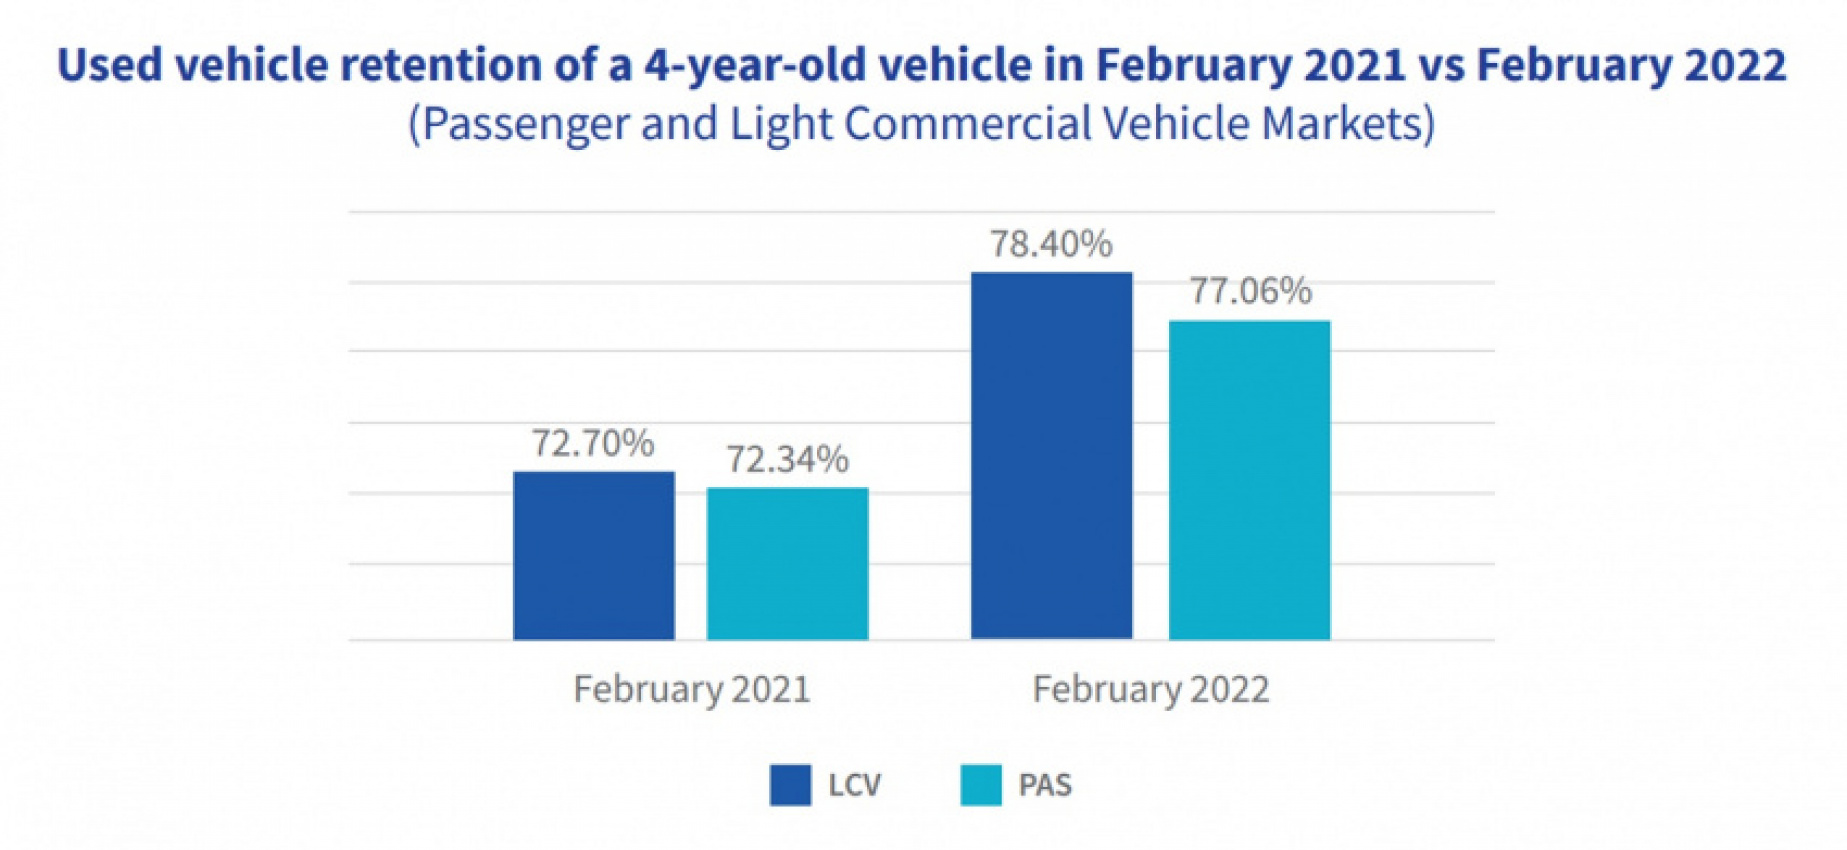 autos, cars, news, toyota, audi, bmw, fiat, ford, honda, isuzu, jaguar, land rover, mazda, nissan, opel, peugeot, volkswagen, volvo, vw and toyota see big improvements in used vehicle value retention